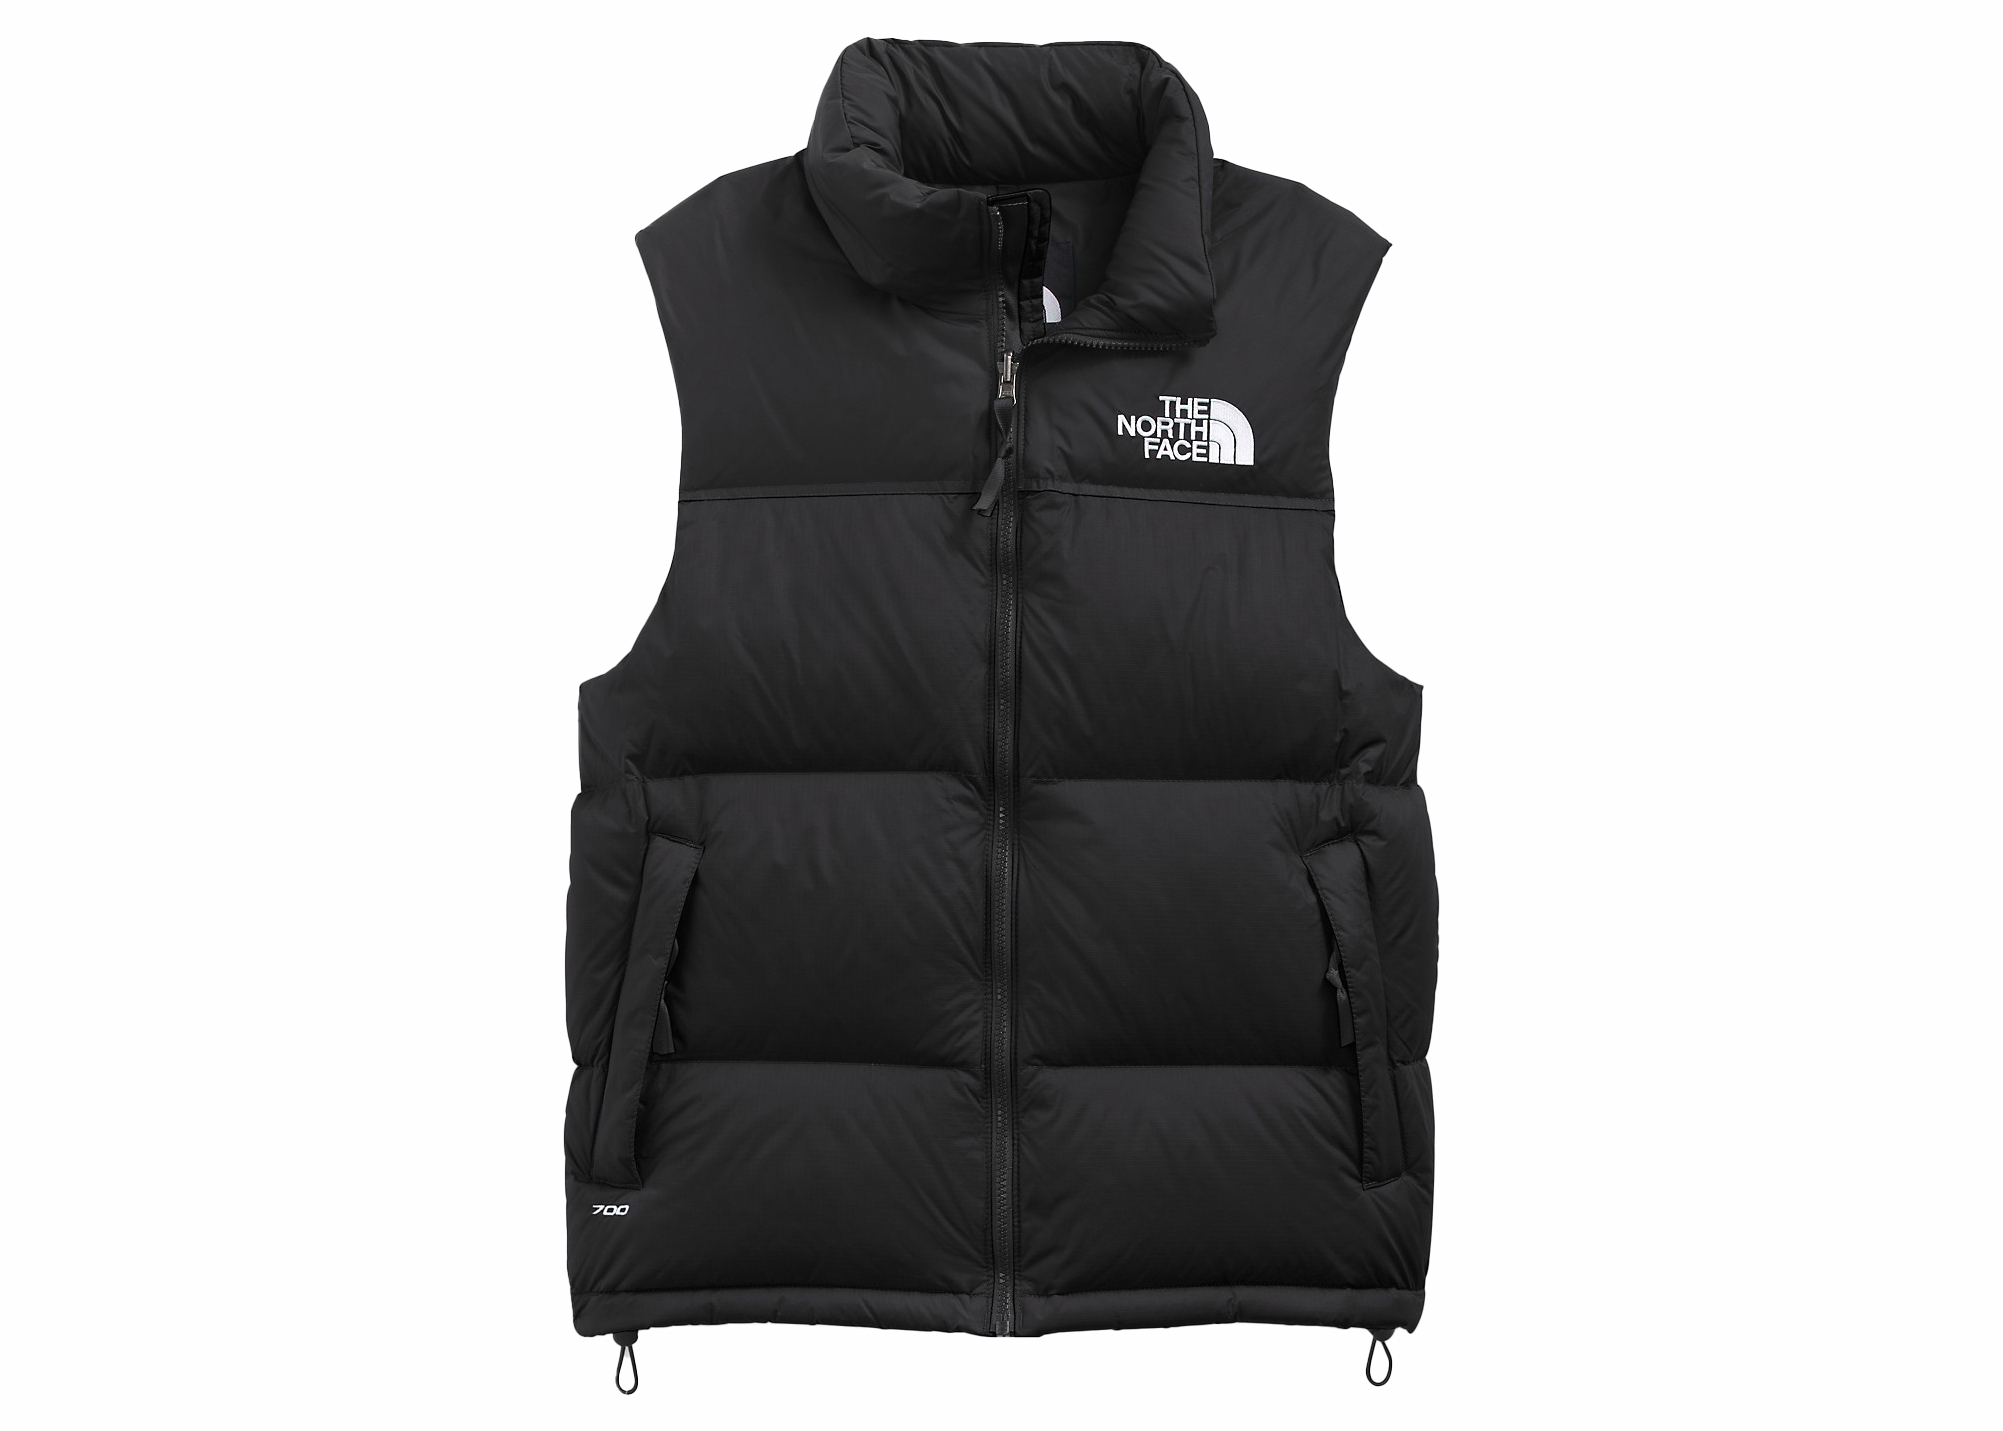 The North Face 1996 Retro Nuptse Vest Recycled Black